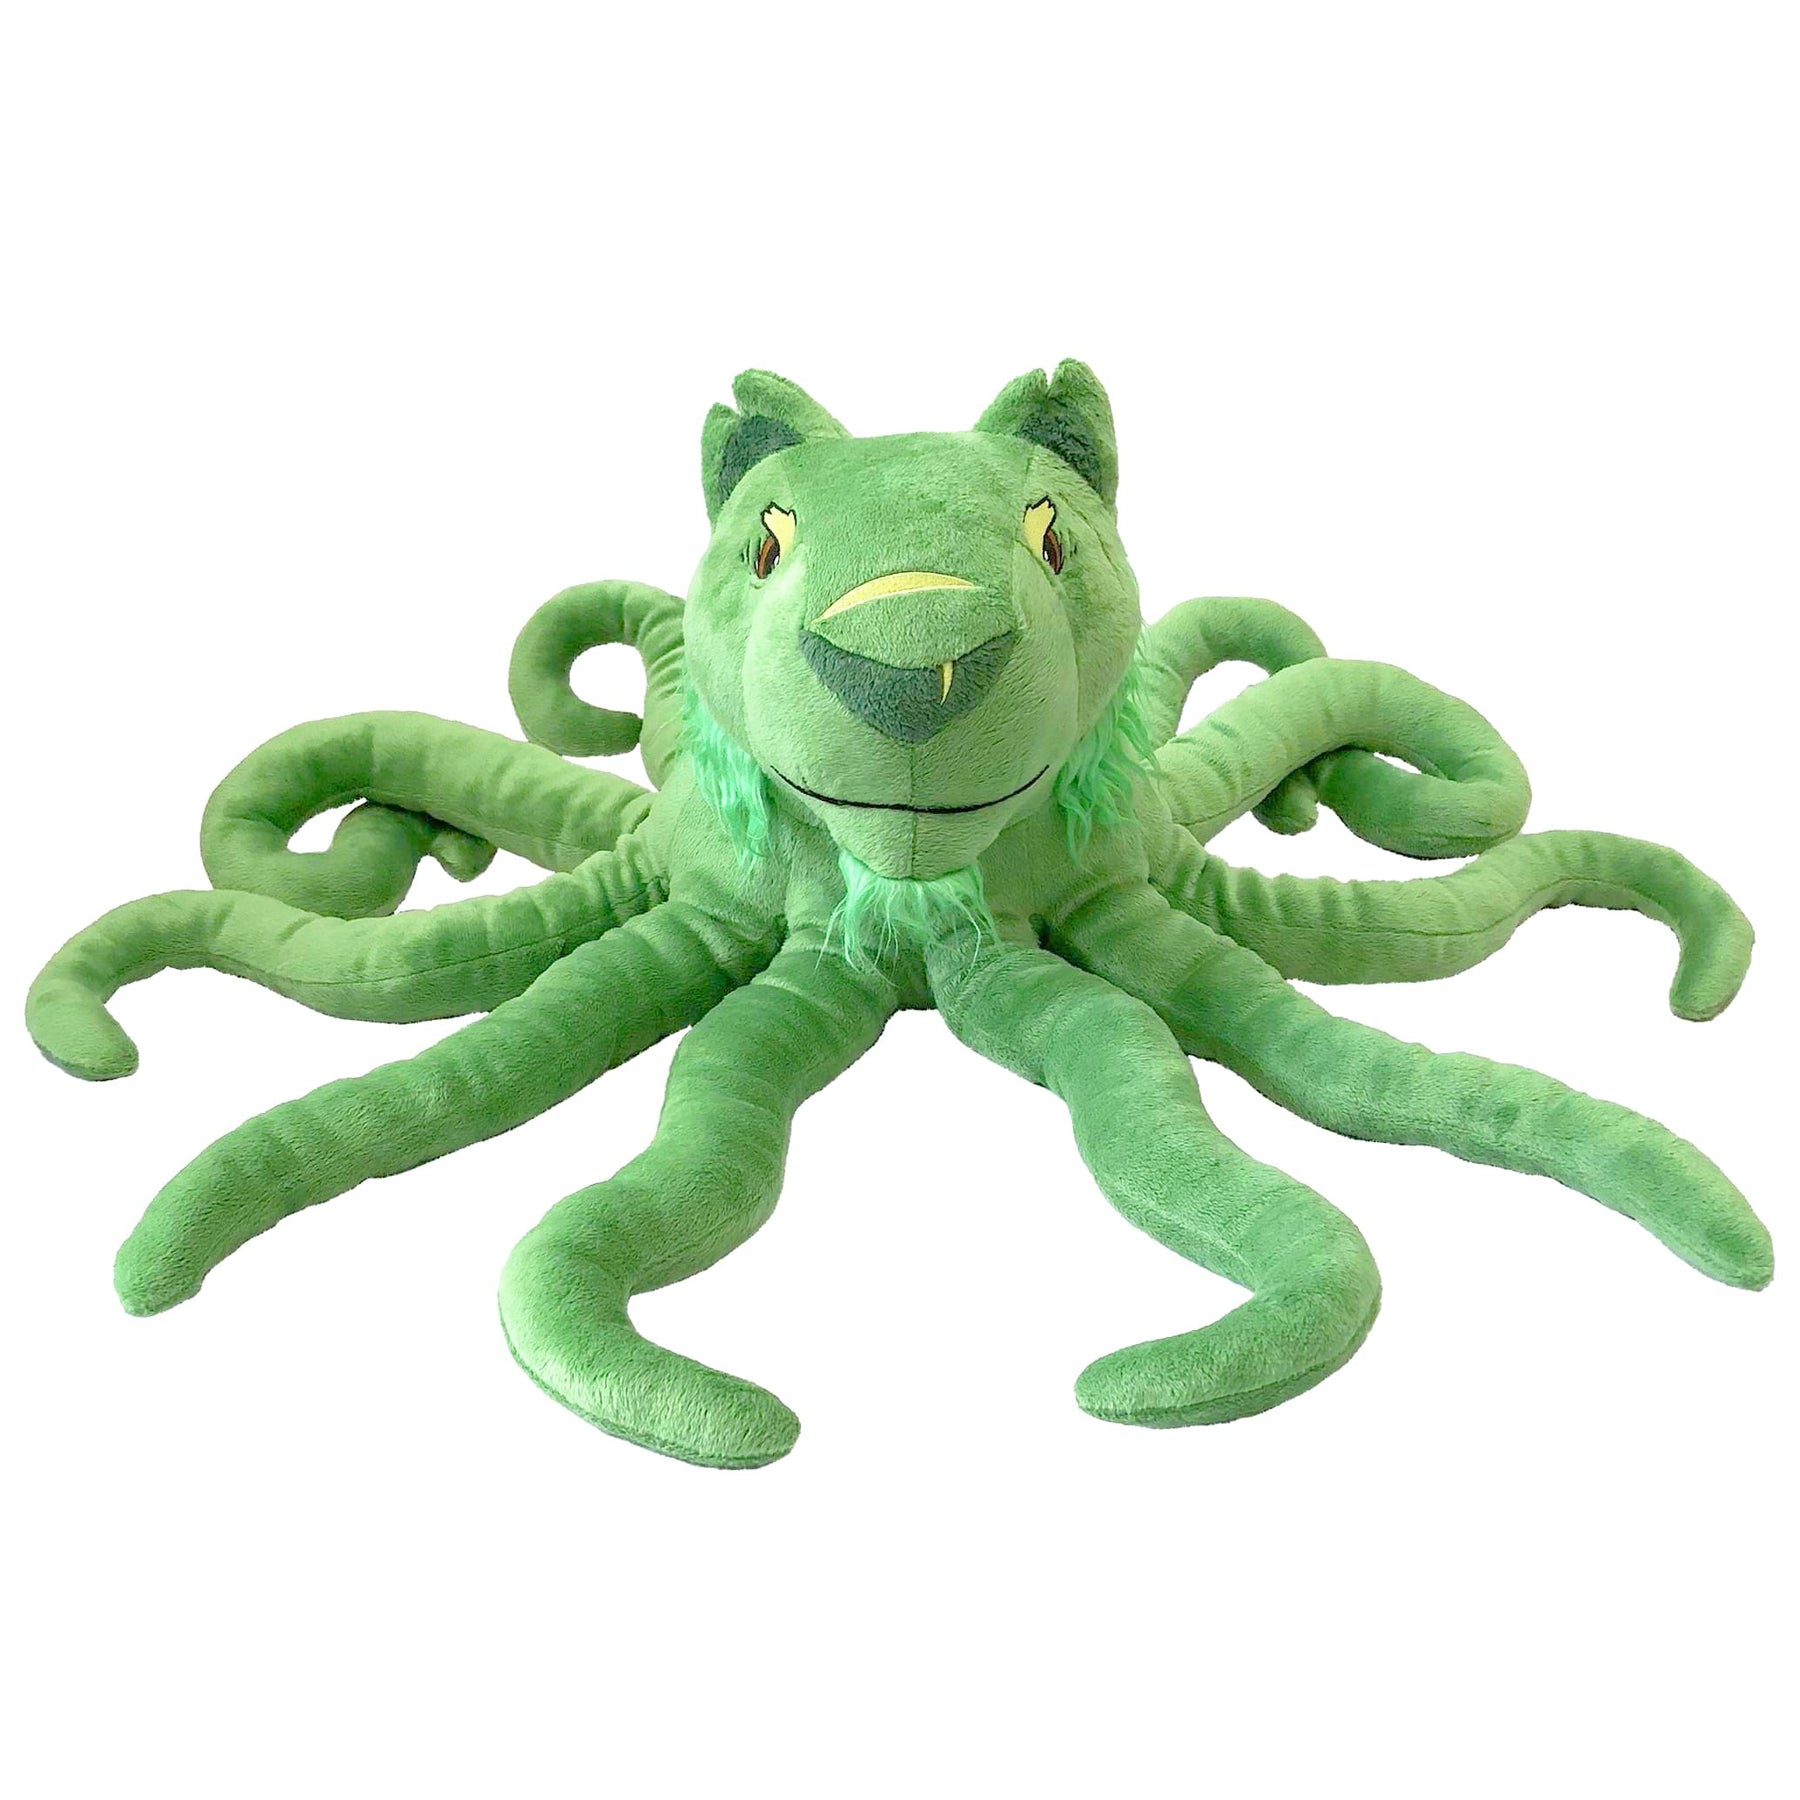 Tentacle Kitty Series Cat Guru Plush Collectible | Measures 28 Inches Long